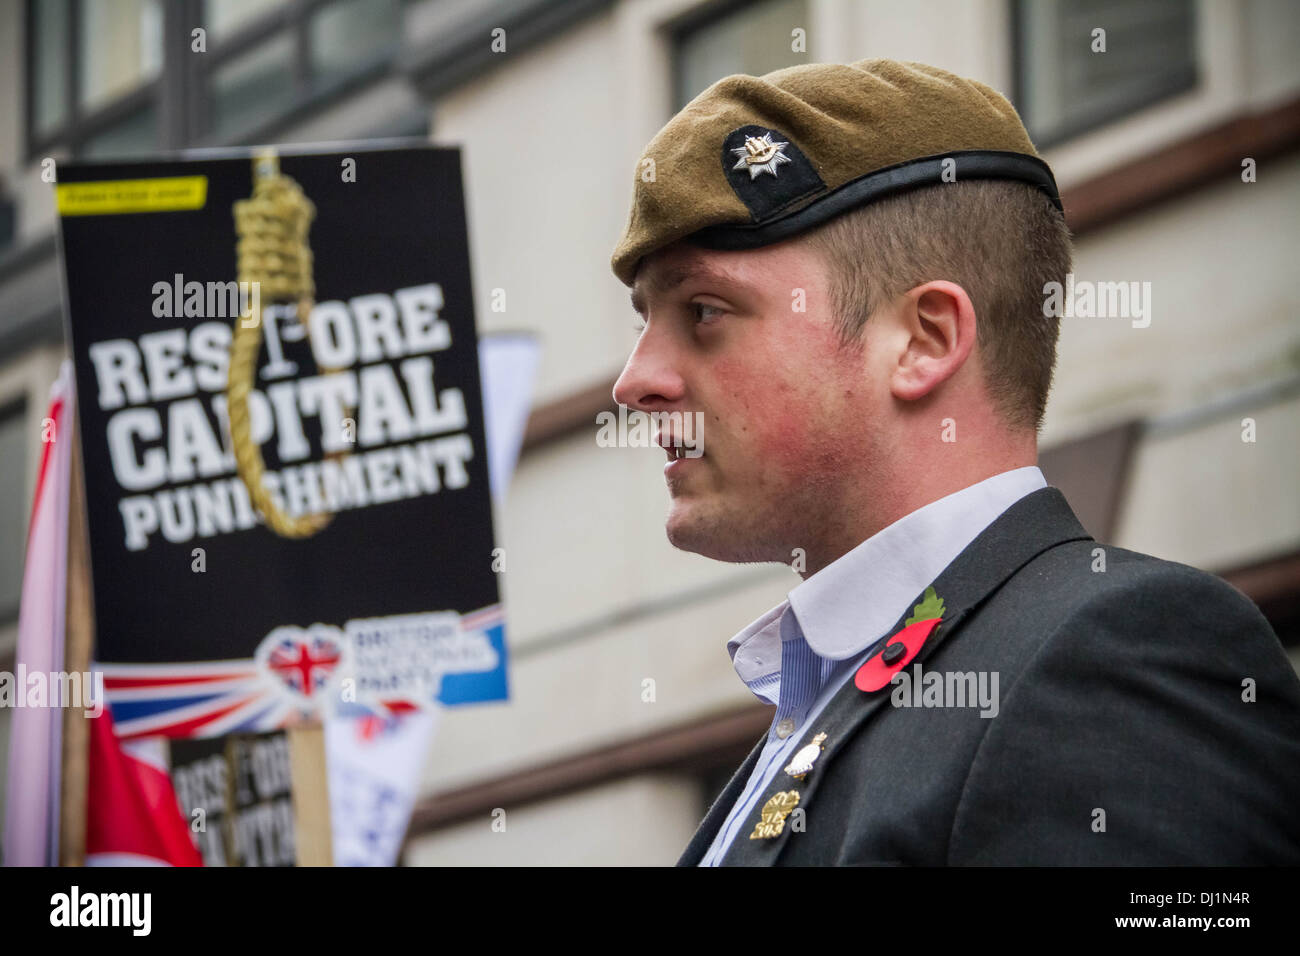 Veterans and serving soldiers stand in the crowds to show support for murdered soldier Lee Rigby outside Old Bailey court in Lon Stock Photo